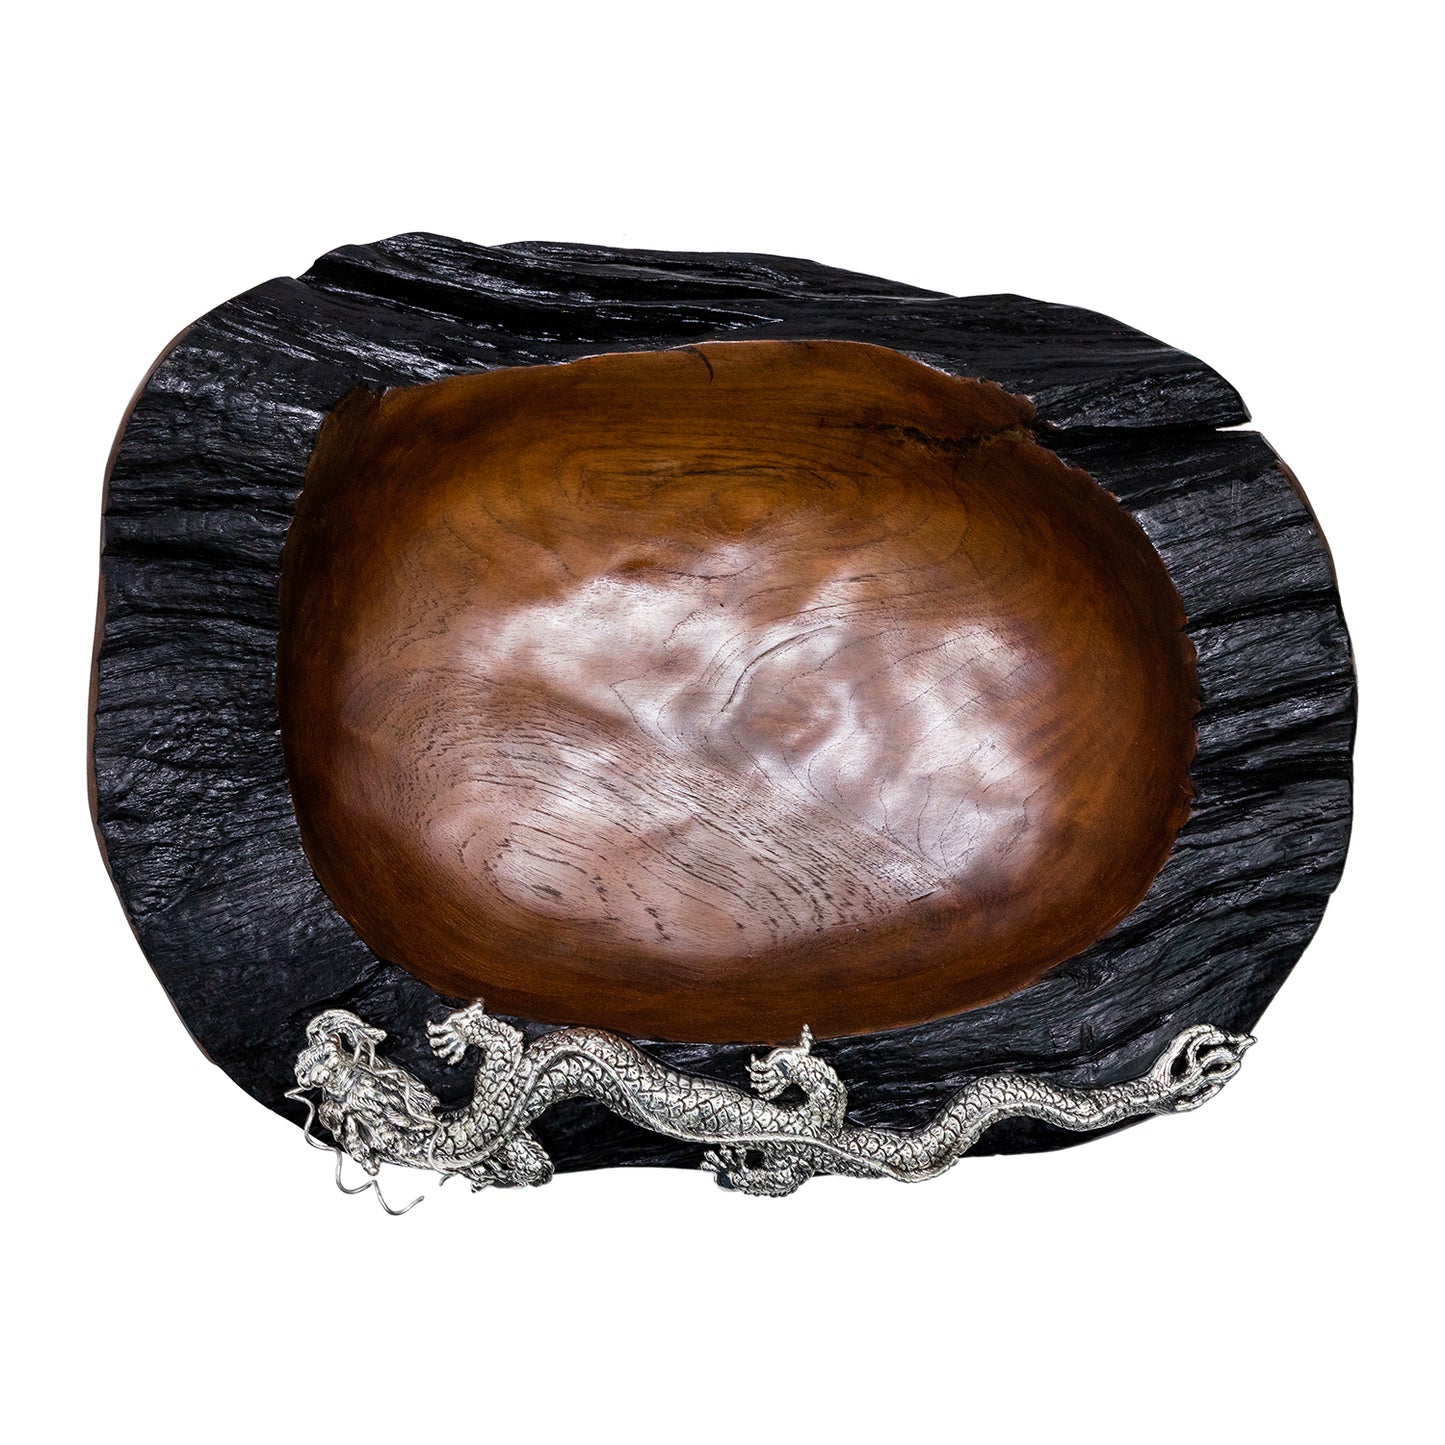 Teak Root Bowl with Sterling Silver Dragon